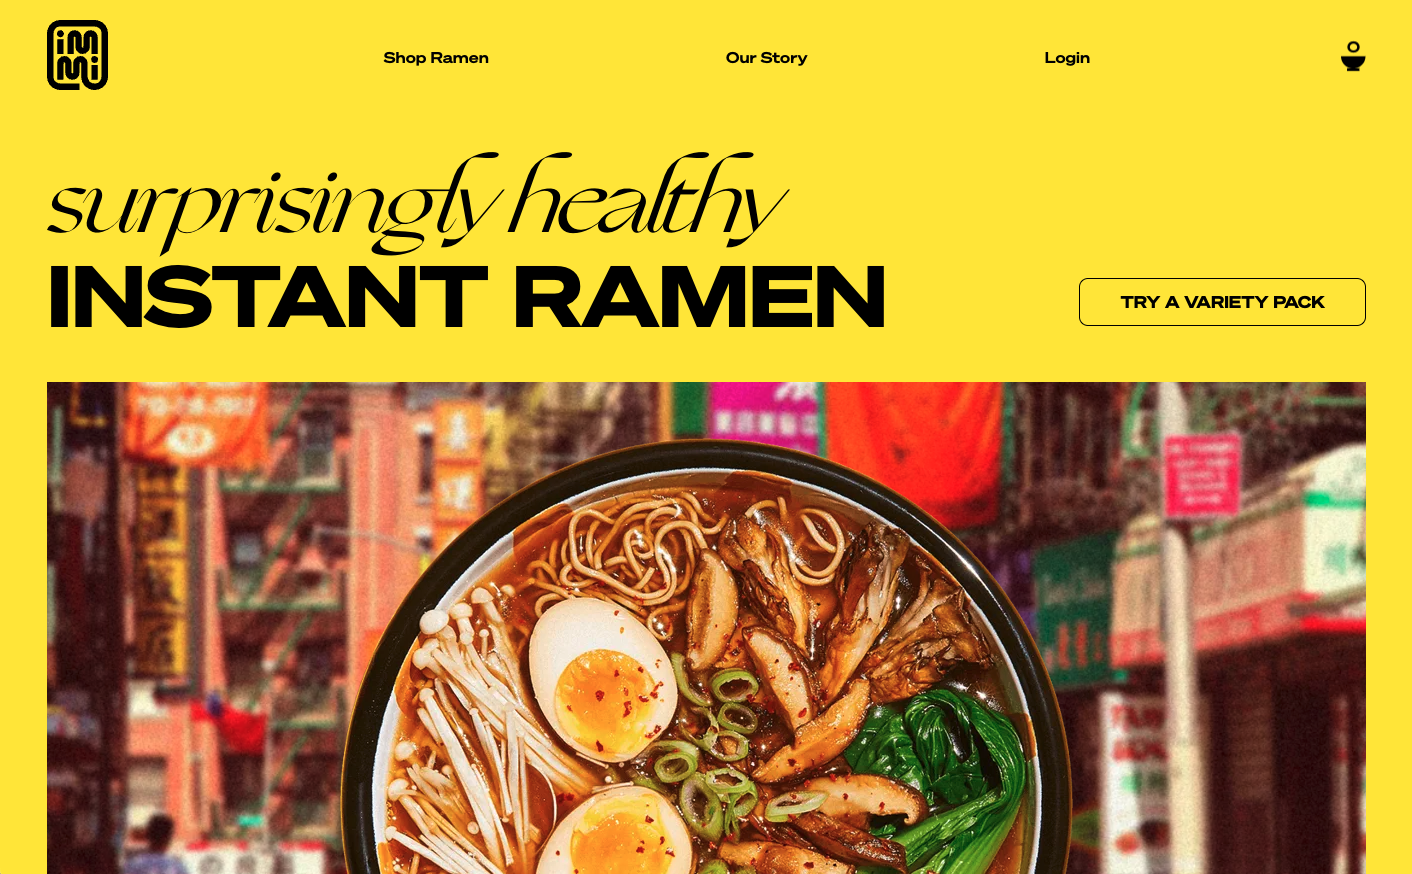 Yellow background with text 'Suprisingly healthy instant ramen' in top left above an image of a delicious bowl of ramen.